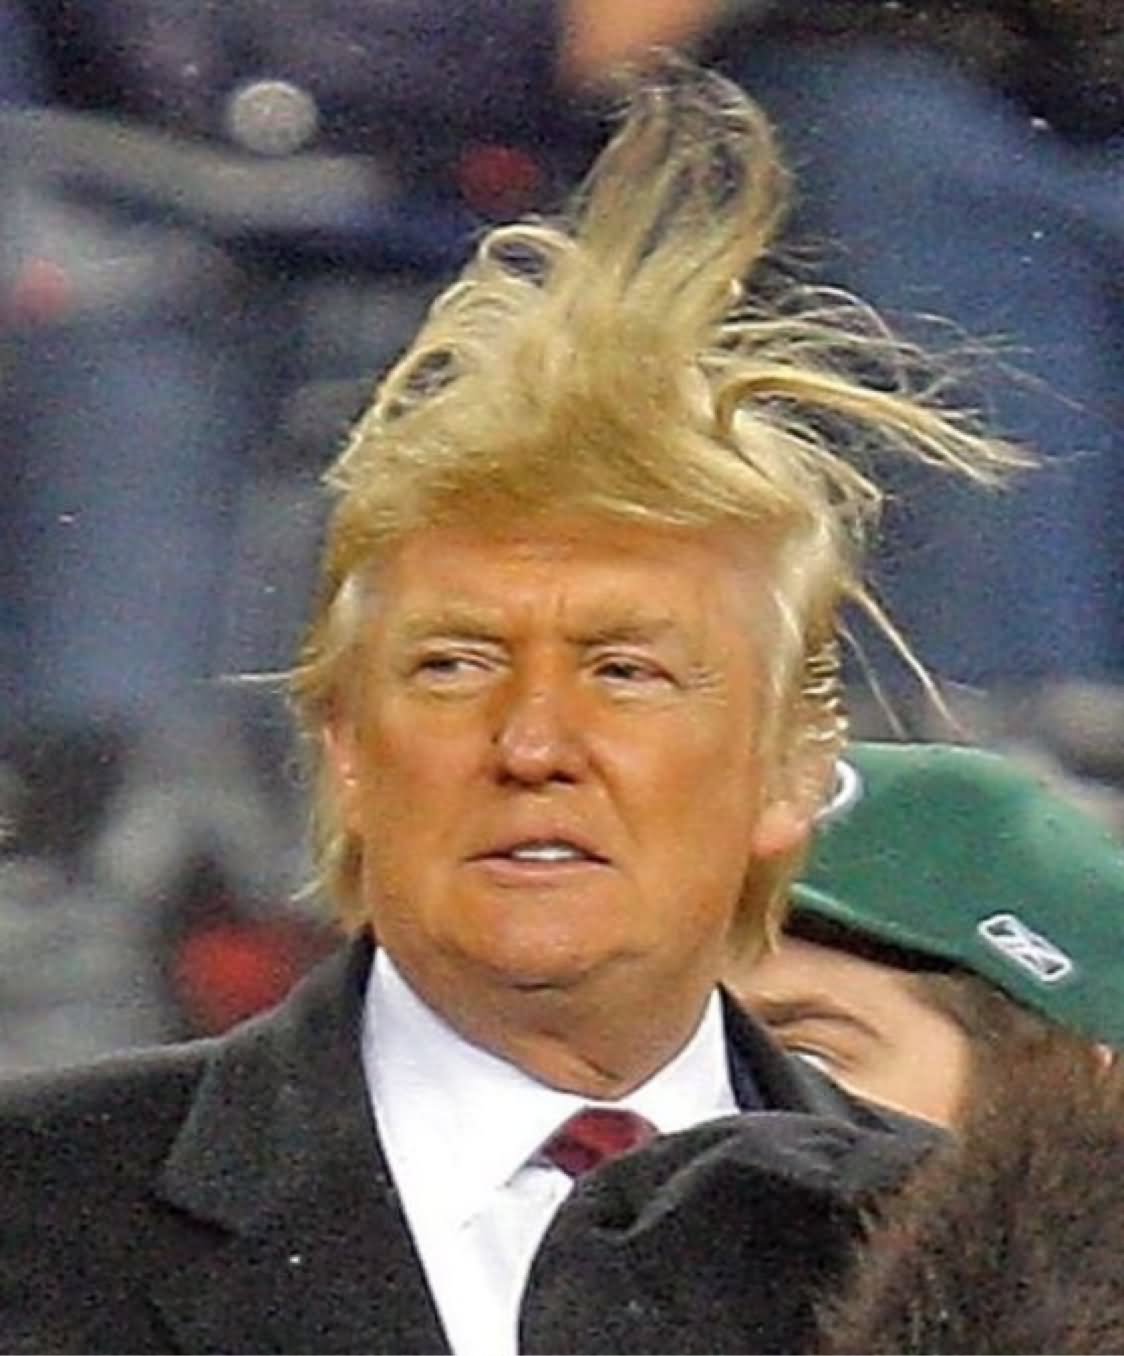 Donald Trump With Blowing Hair Funny Image